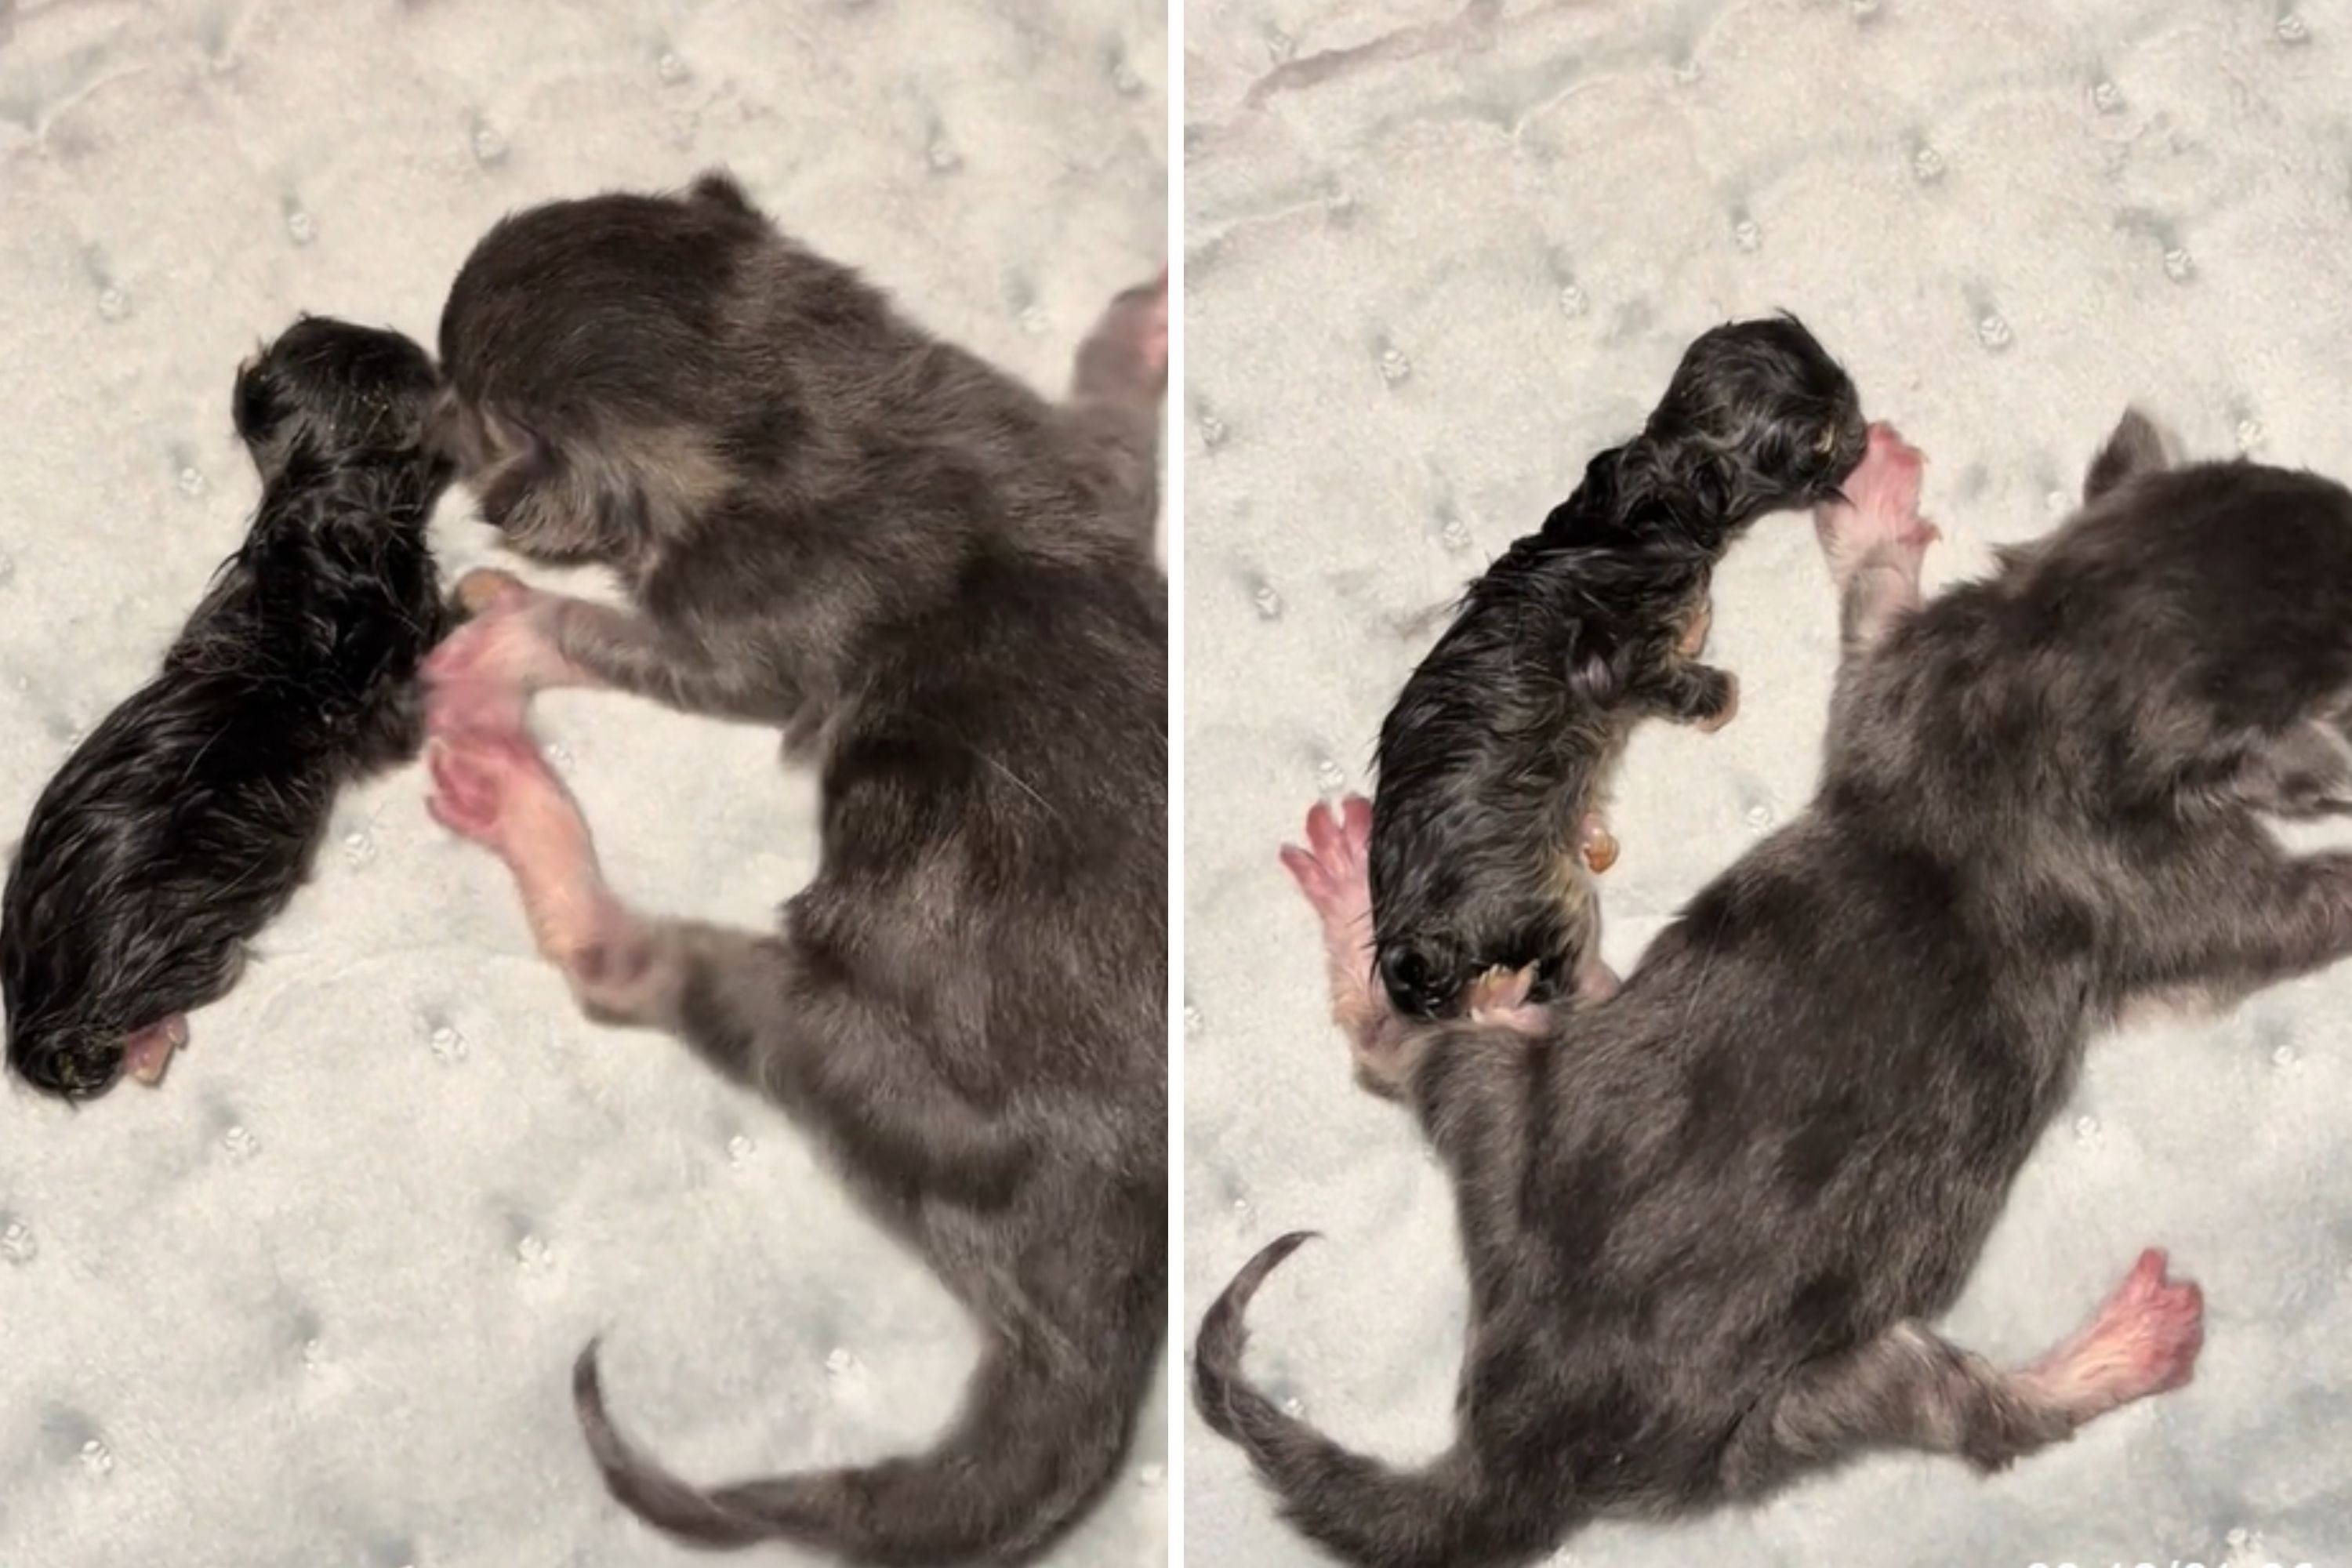 Tiny Kitten Fights To Survive, Then Grows Up To Be Half The Size